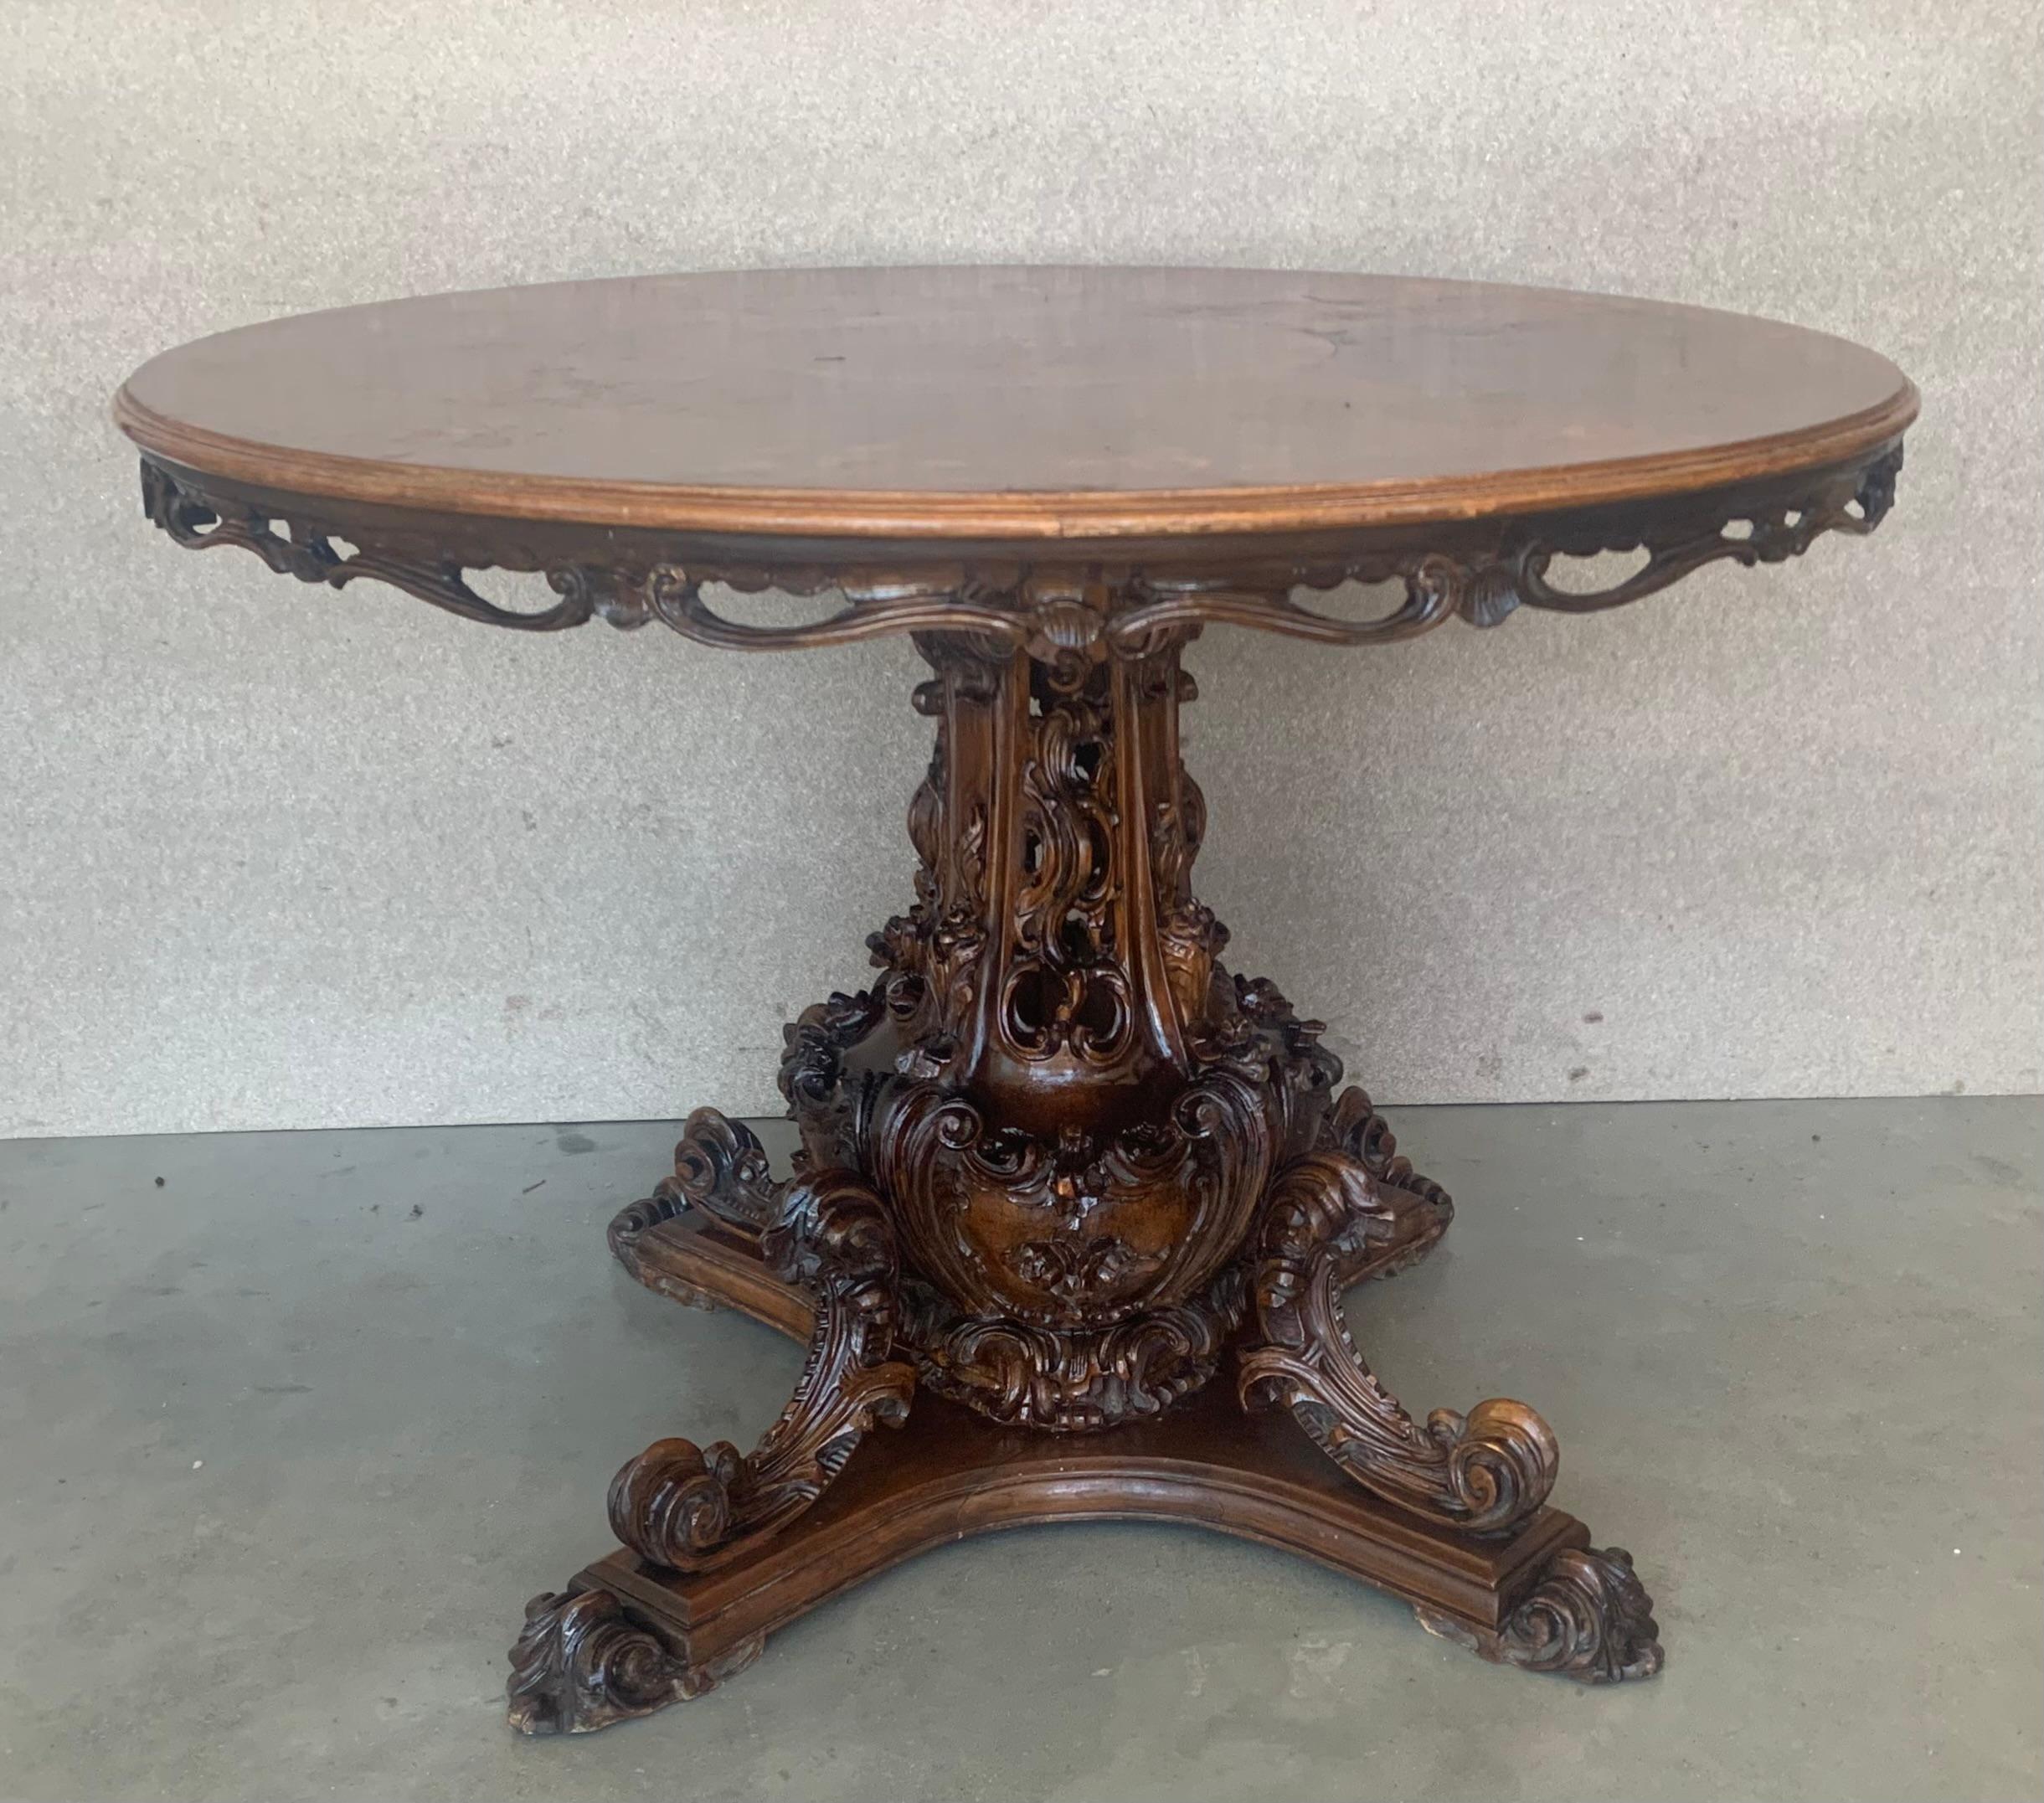 A very fine Rococo-influenced Regency table in mahogany with round marquetry top and turned and beveled column on quatre-form base ending in 